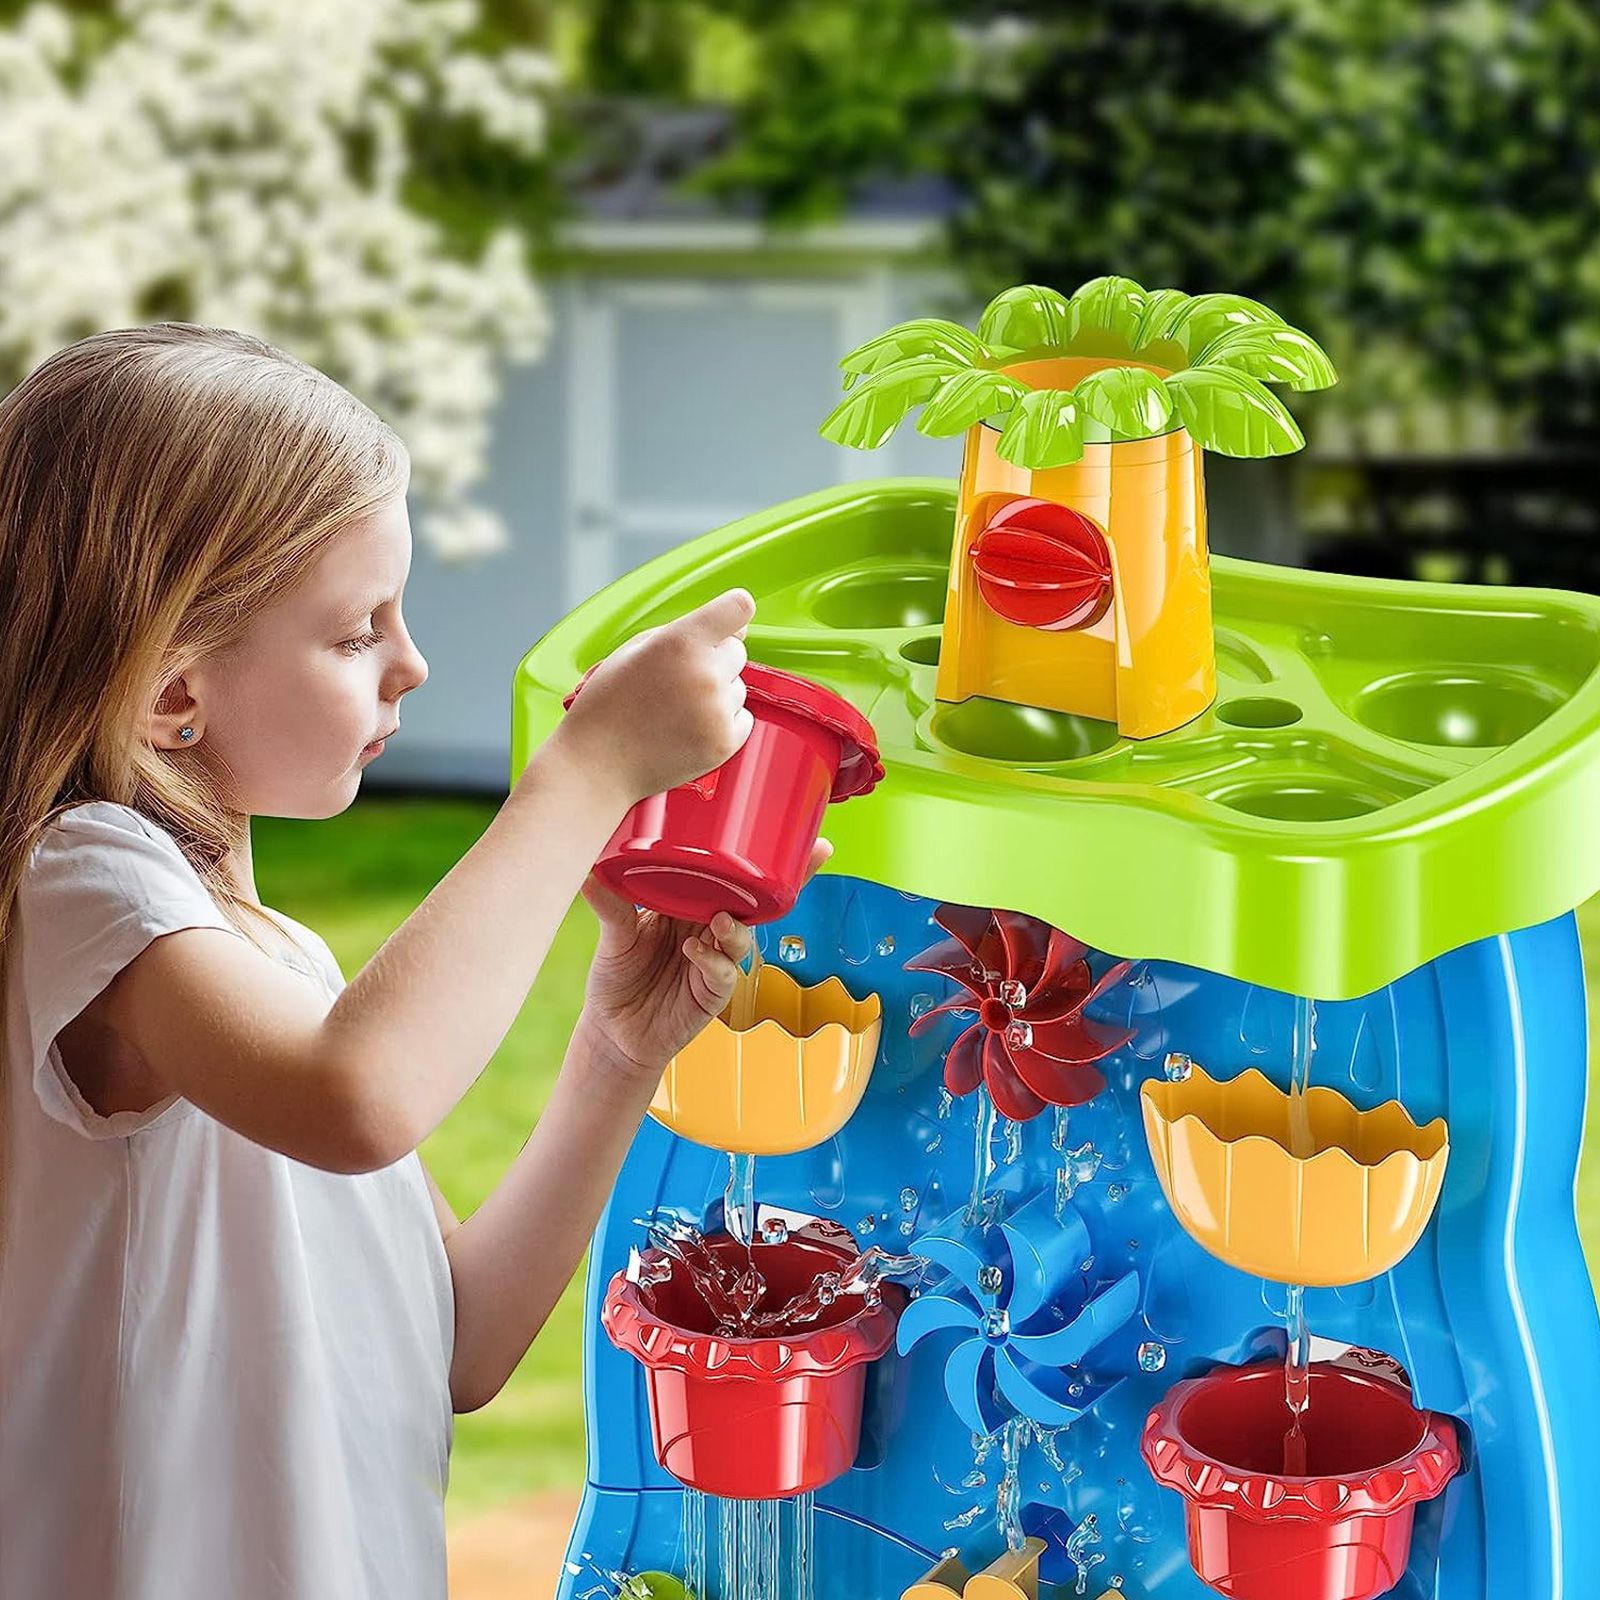 Waterfall Wall Water Table Sand Pit Play Ground Activity Centre Playset Toys Park Outdoor Indoor Backyard Sensory Waterplay Station